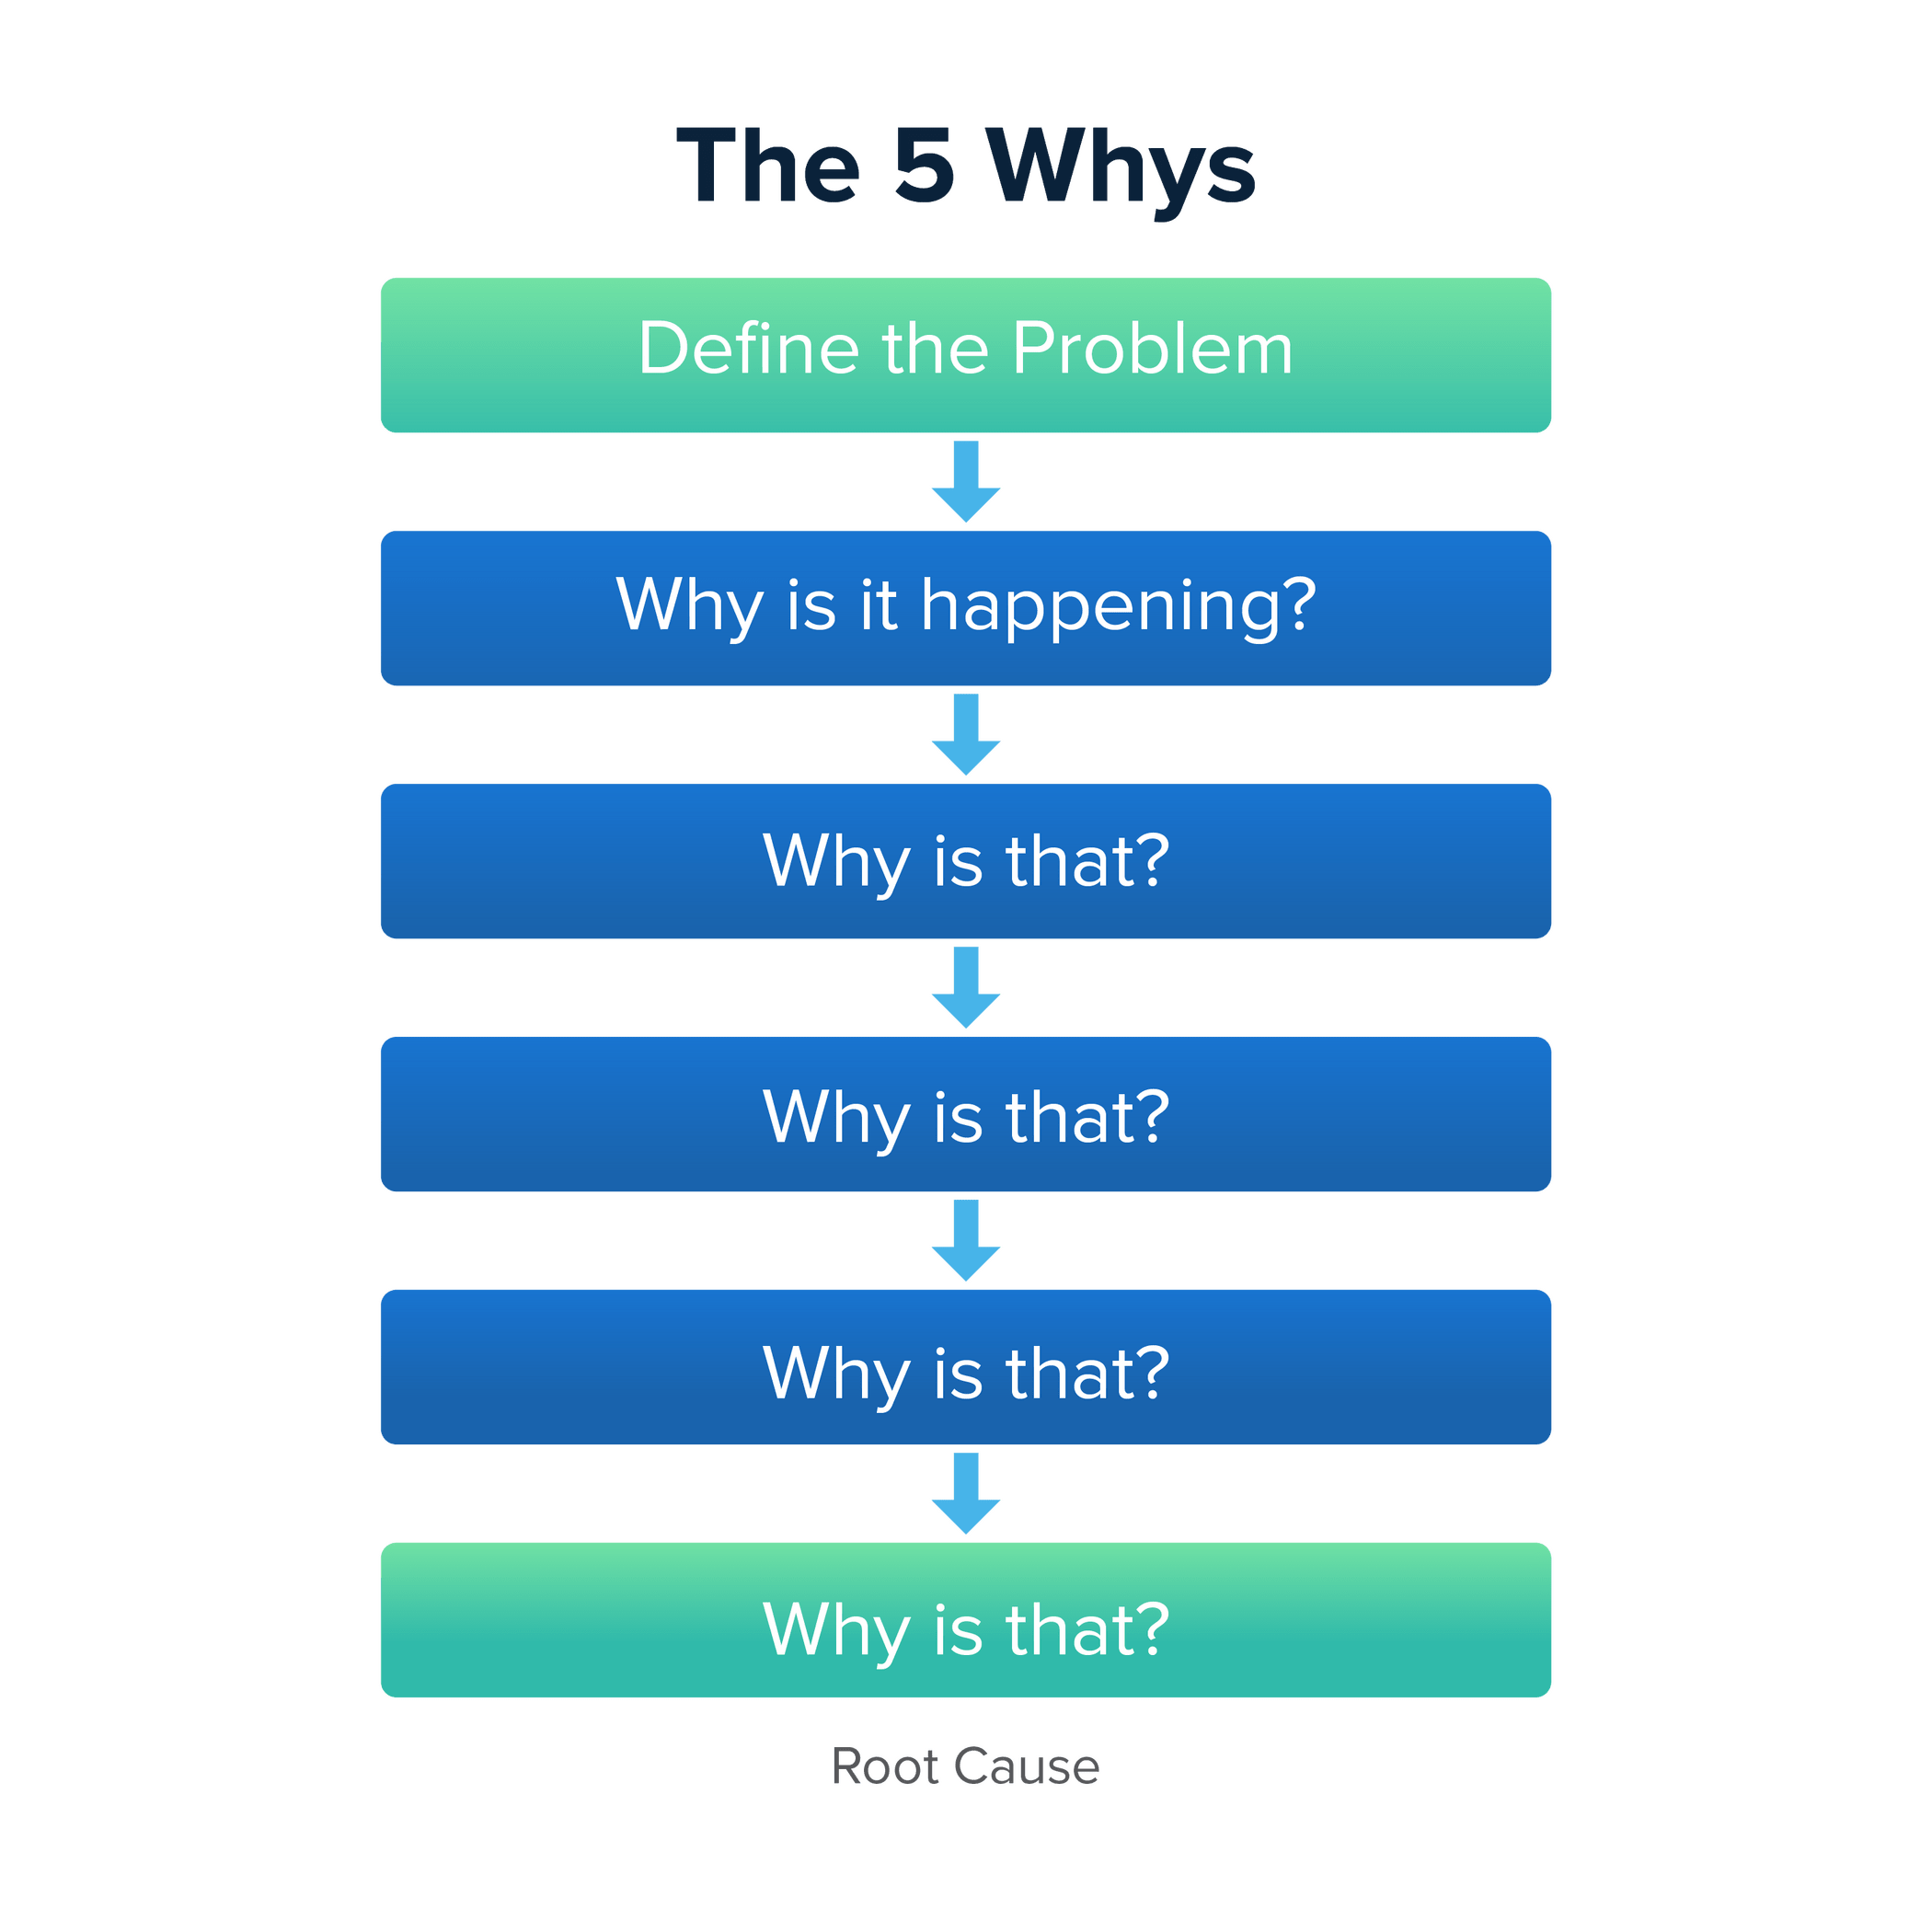 How you can use “5 Whys” to understand the root cause of any problem